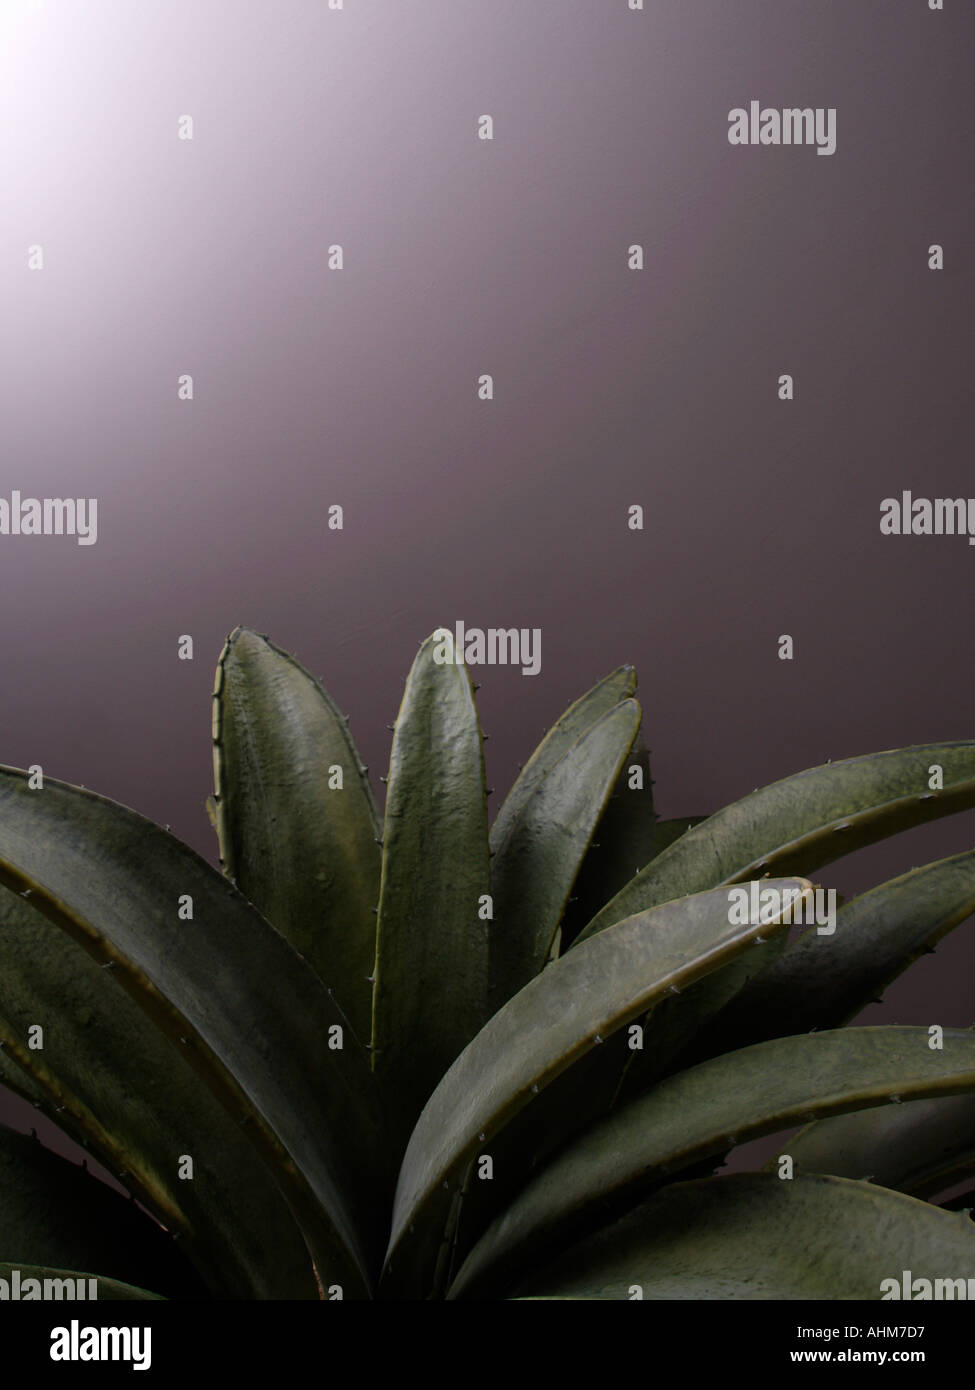 semi abstract shot of a plant in front of a lavender colored wall Stock Photo